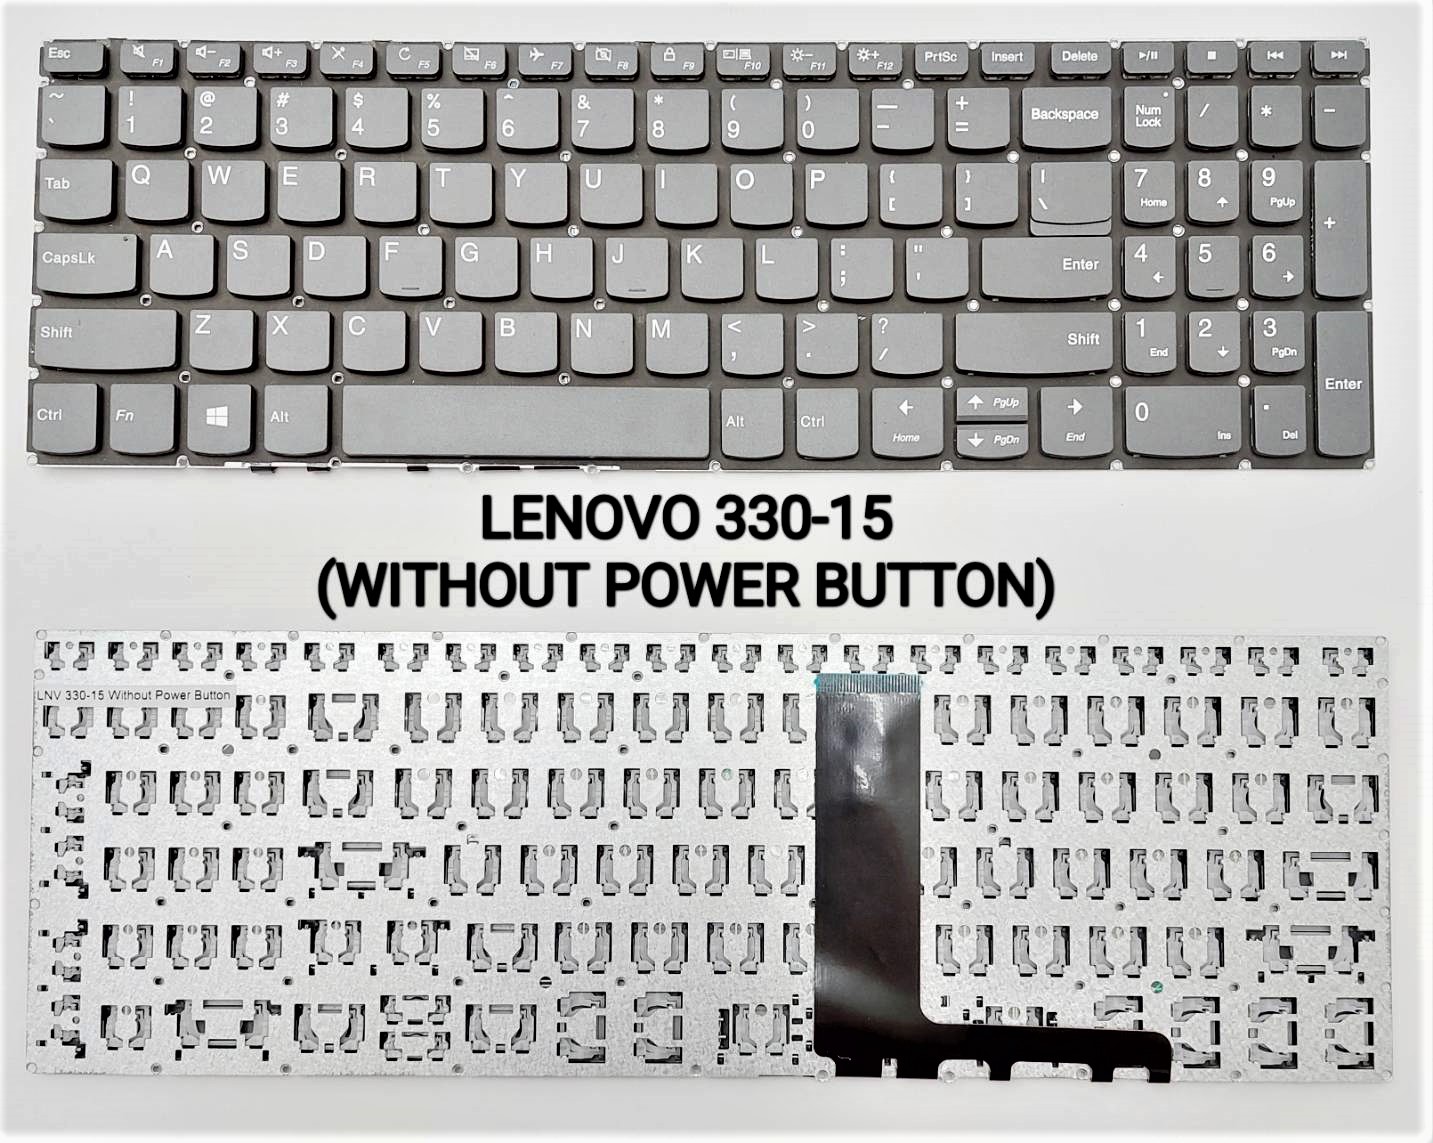 LENOVO 330-15 KEYBOARD (WITHOUT POWER BUTTON)